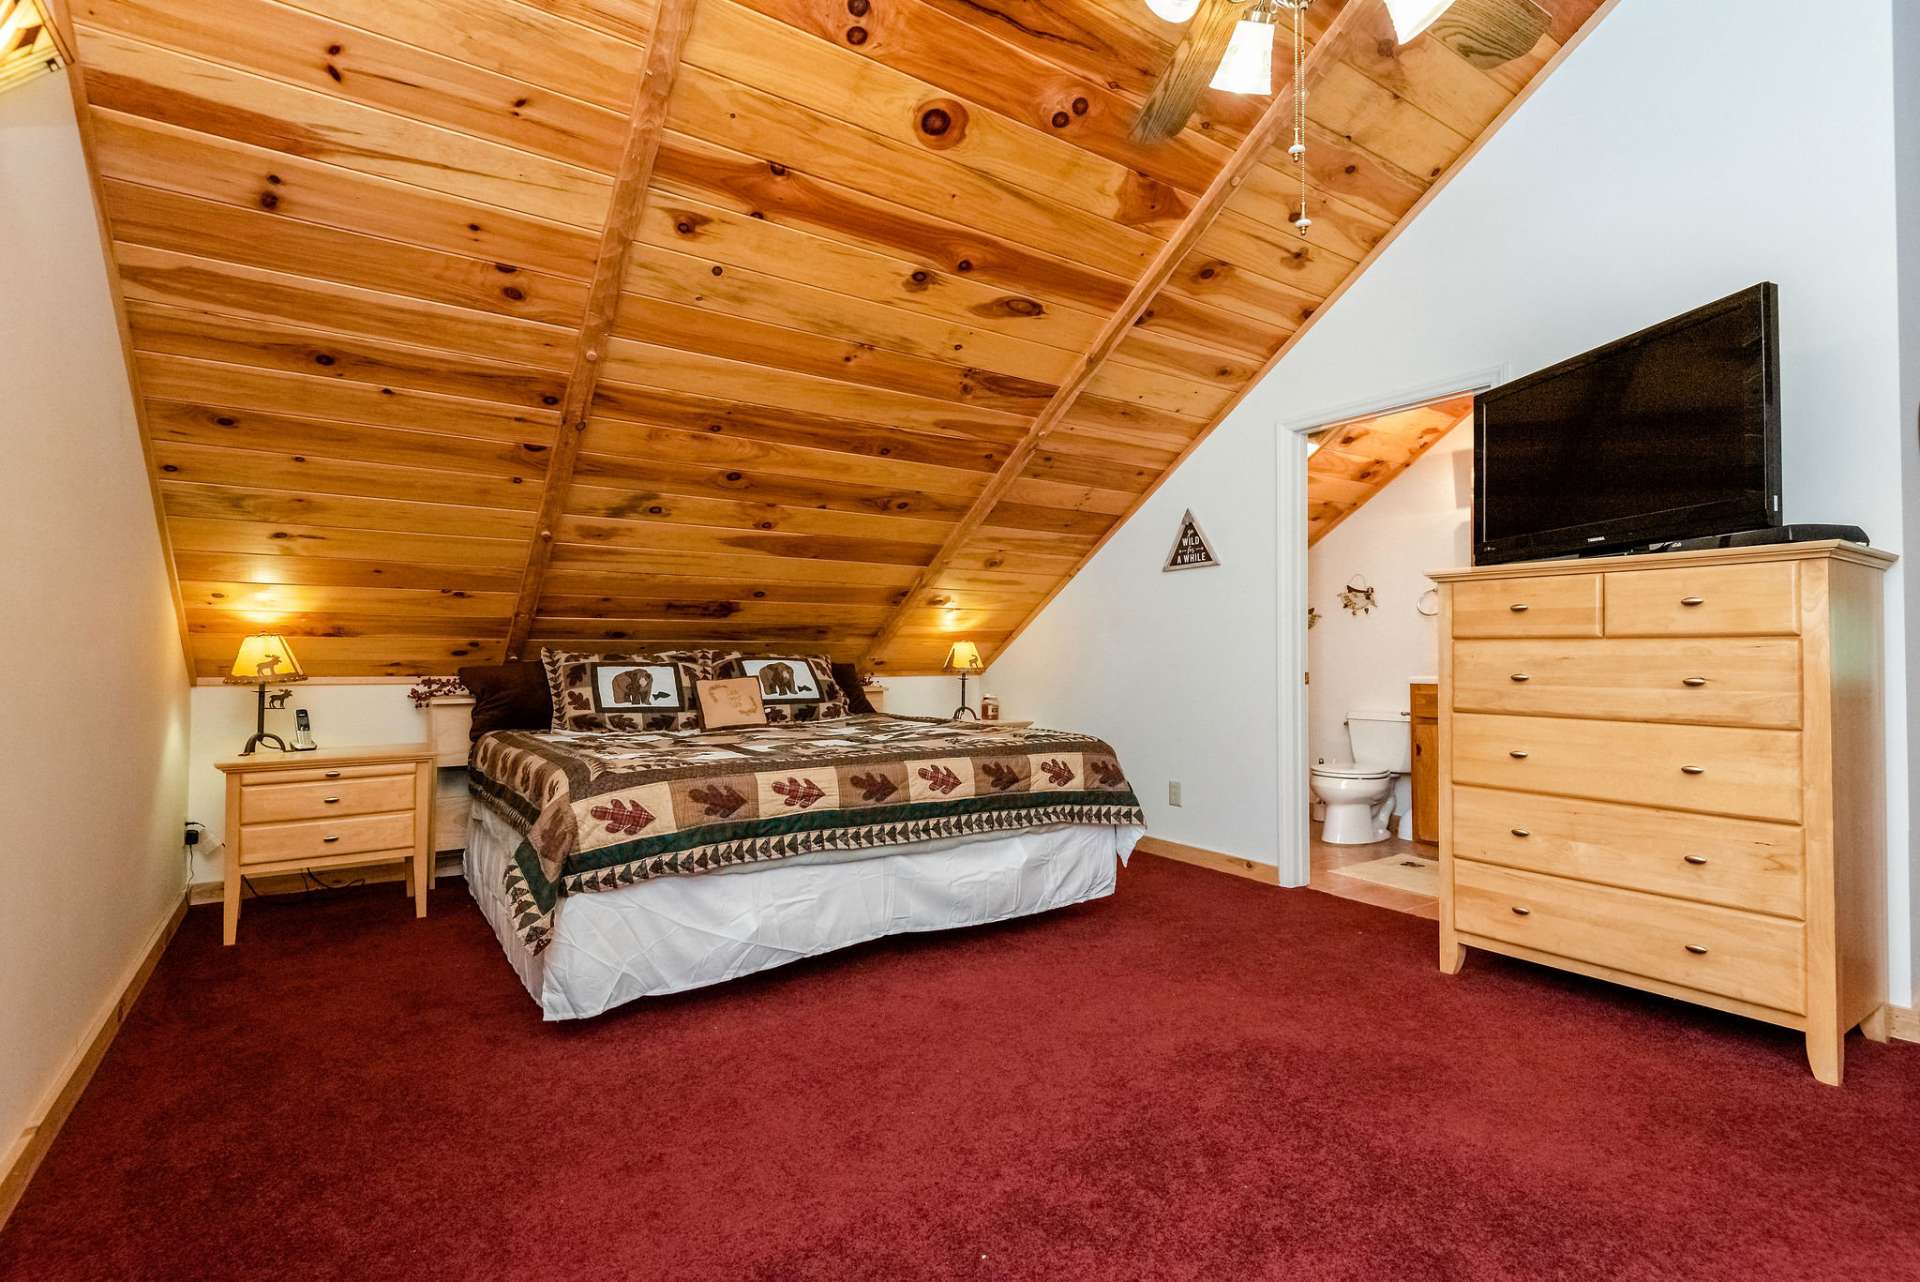 Your master bedroom suite will be your sanctuary and where the visions of mountain memories dance in your head.